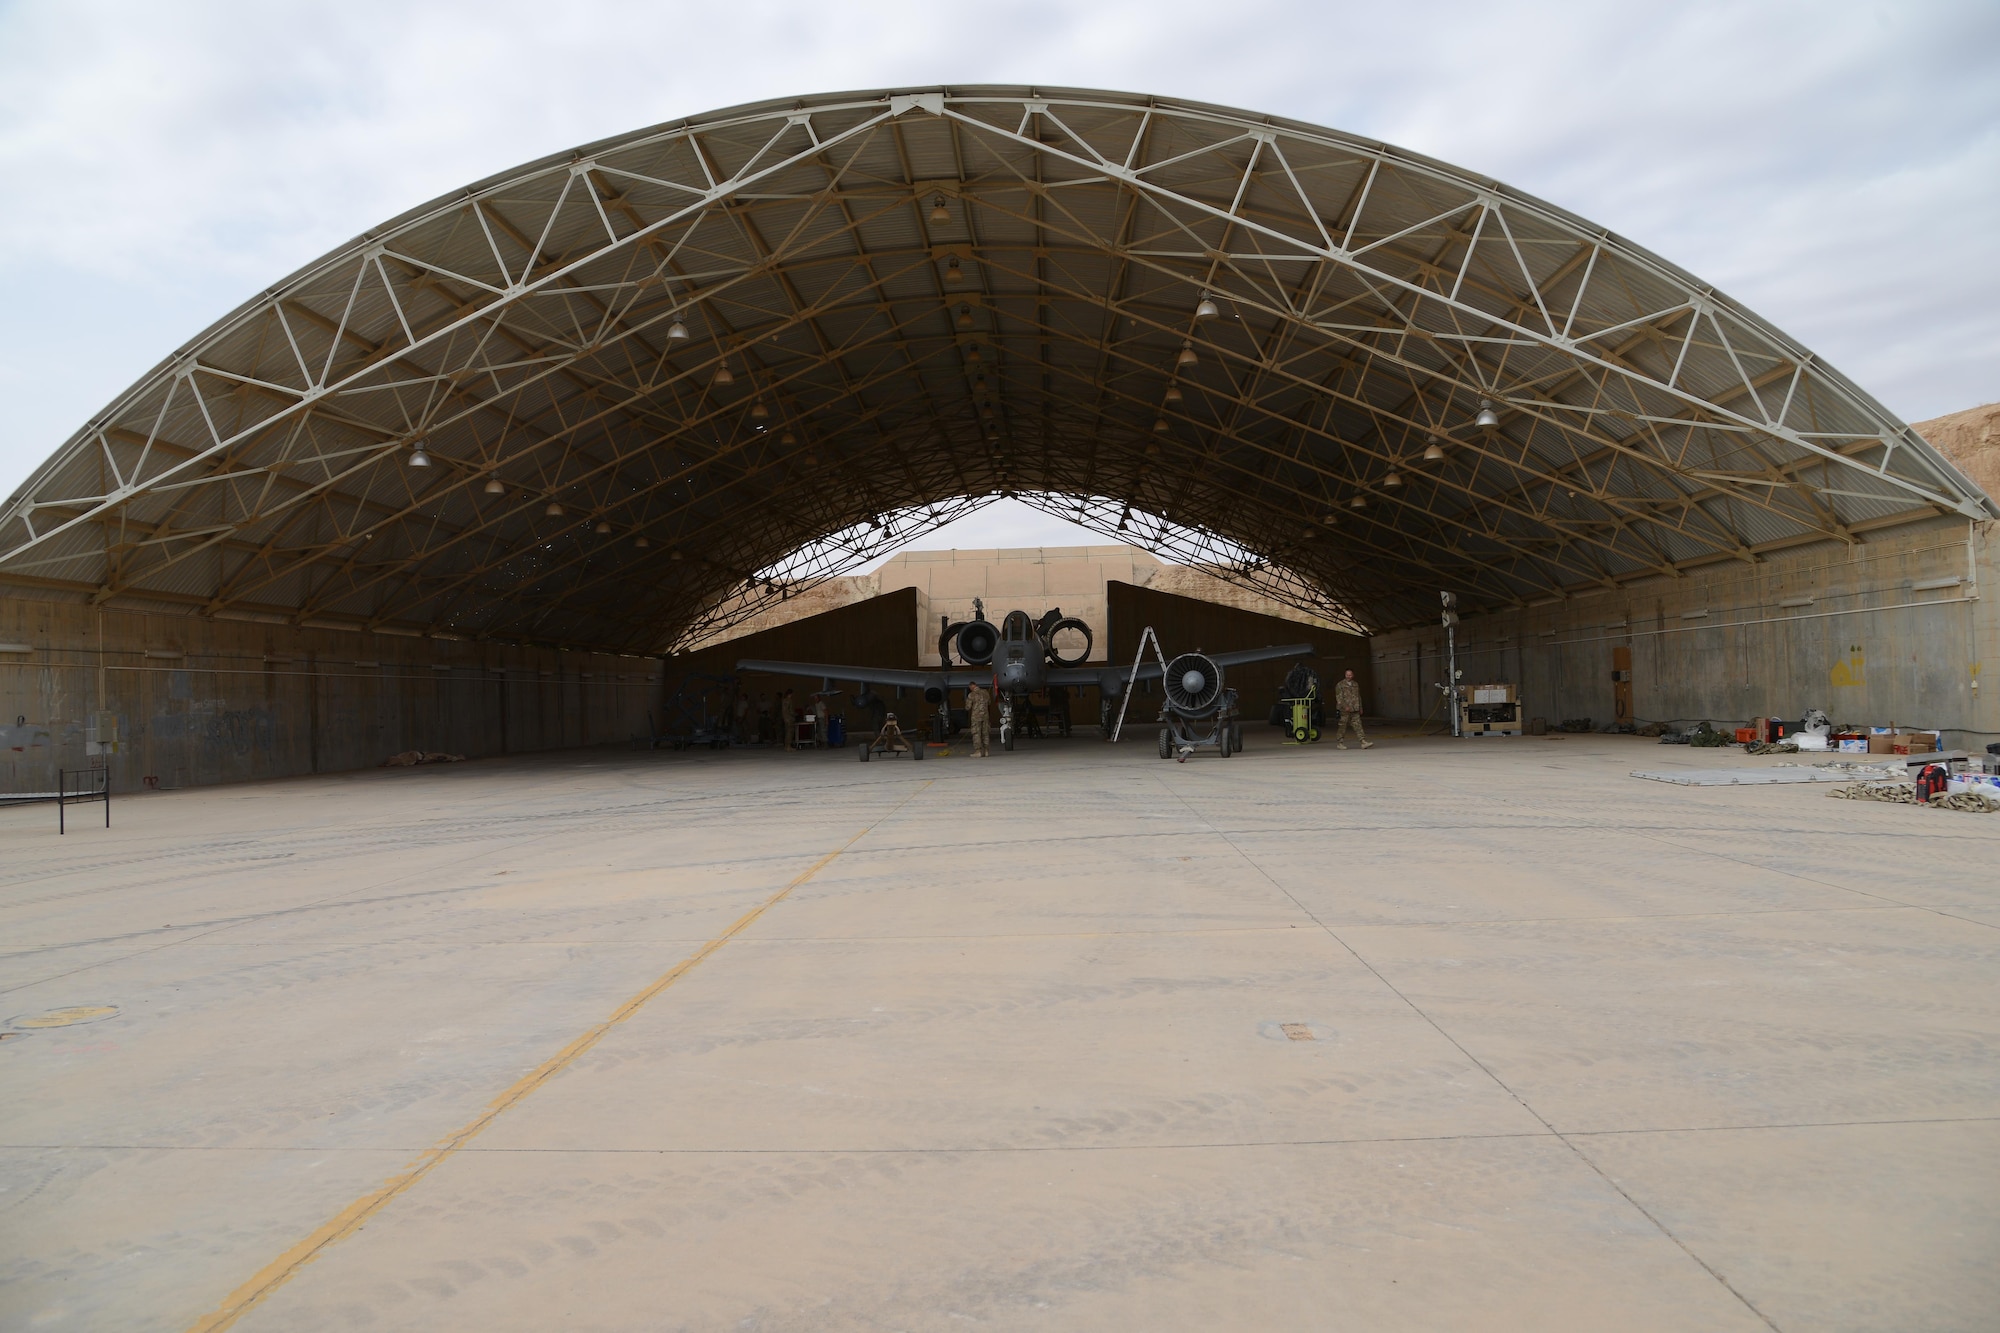 Airmen from the 332nd Expeditionary Maintenance Squadron work in an abandoned aircraft shelter at Al Asad Air Base, Iraq to repair an A-10C Thunderbolt II that suffered catastrophic engine failure. A maintenance response team from the 332nd EMXG repaired the jet and got it back in the air less than five days after the jet suffered catastrophic engine failure and had to divert there. (U.S. Air Force photo by Tech. Sgt. Jared Marquis/released)